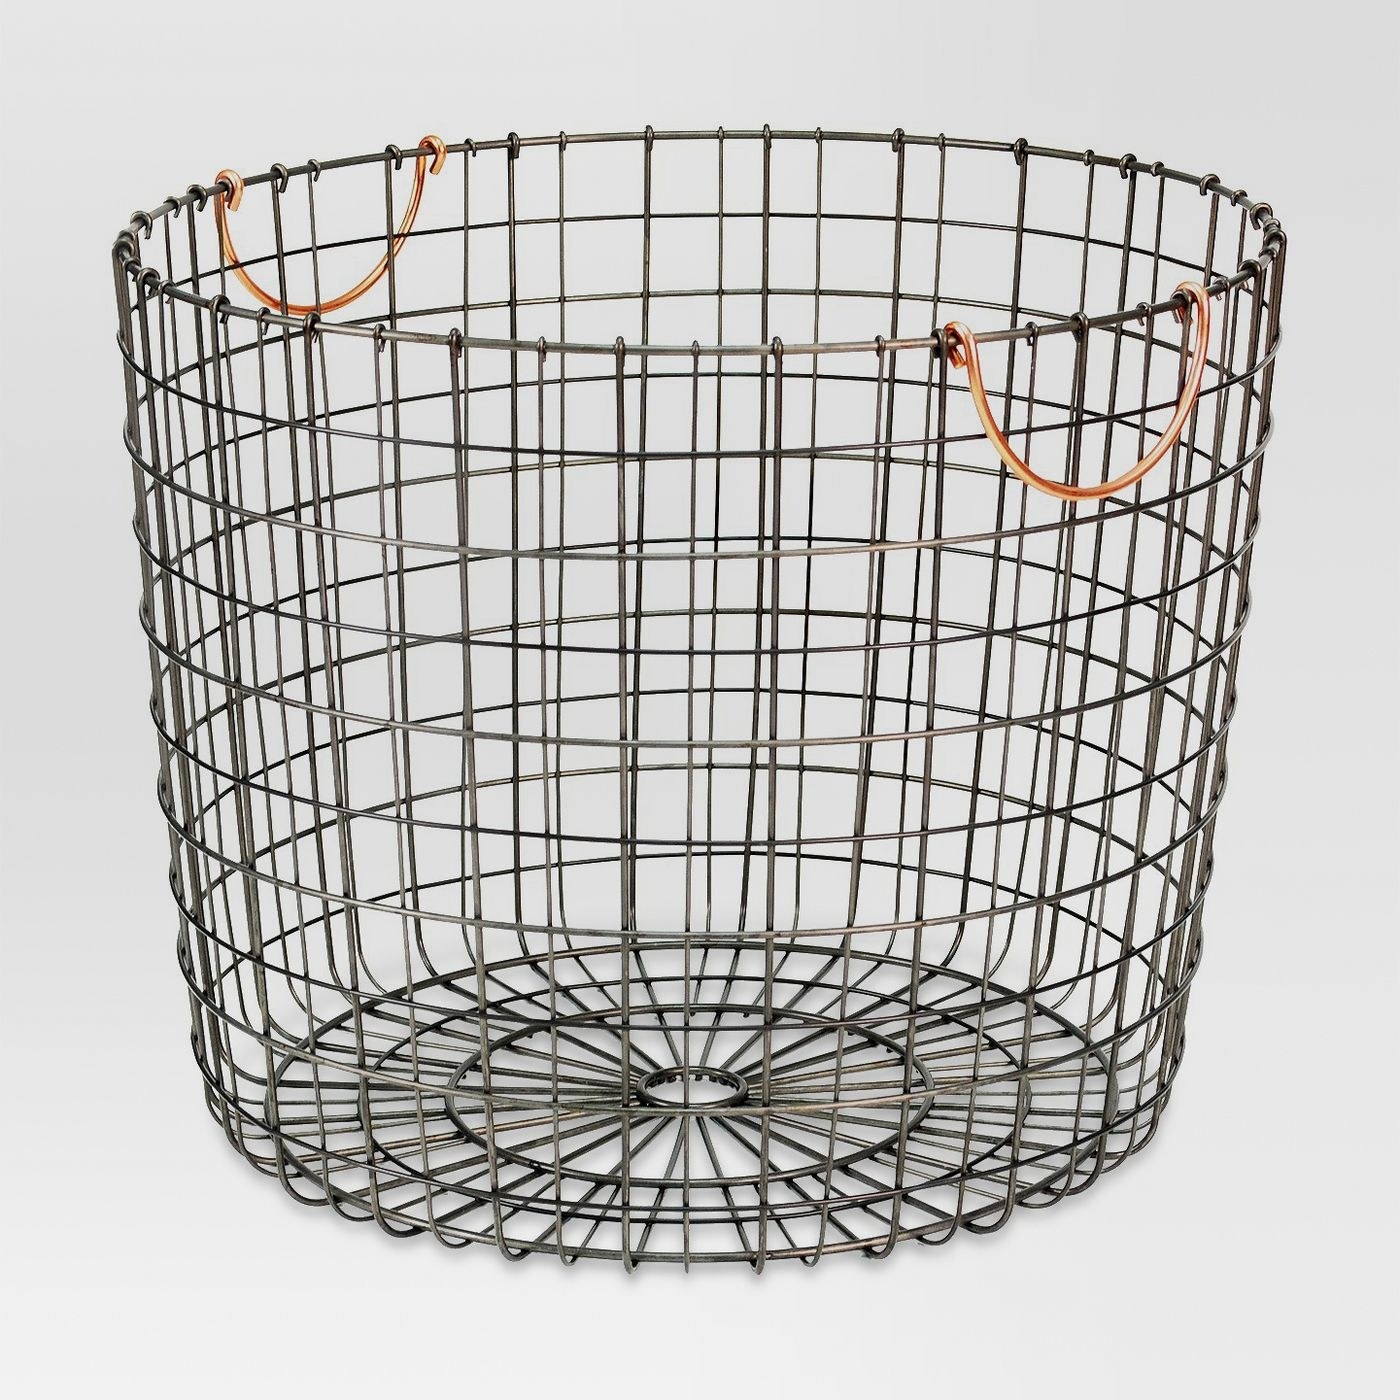 The metal basket with contrasting handles